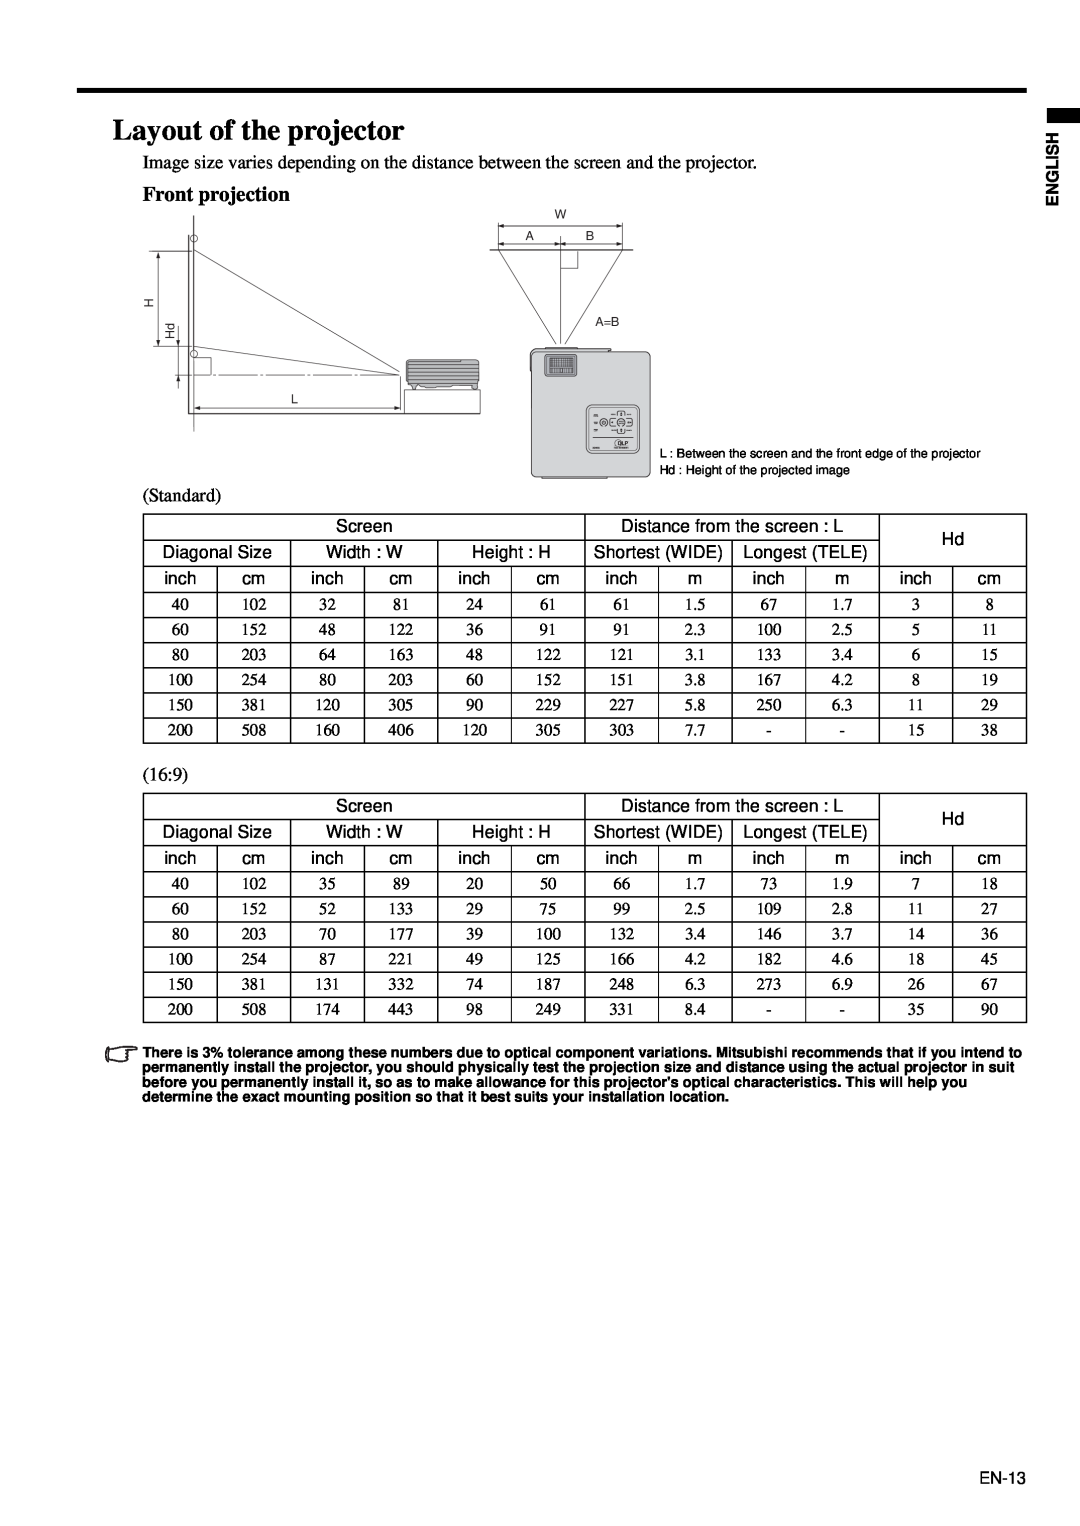 Mitsubishi Electronics XD95U user manual Layout of the projector, Front projection 